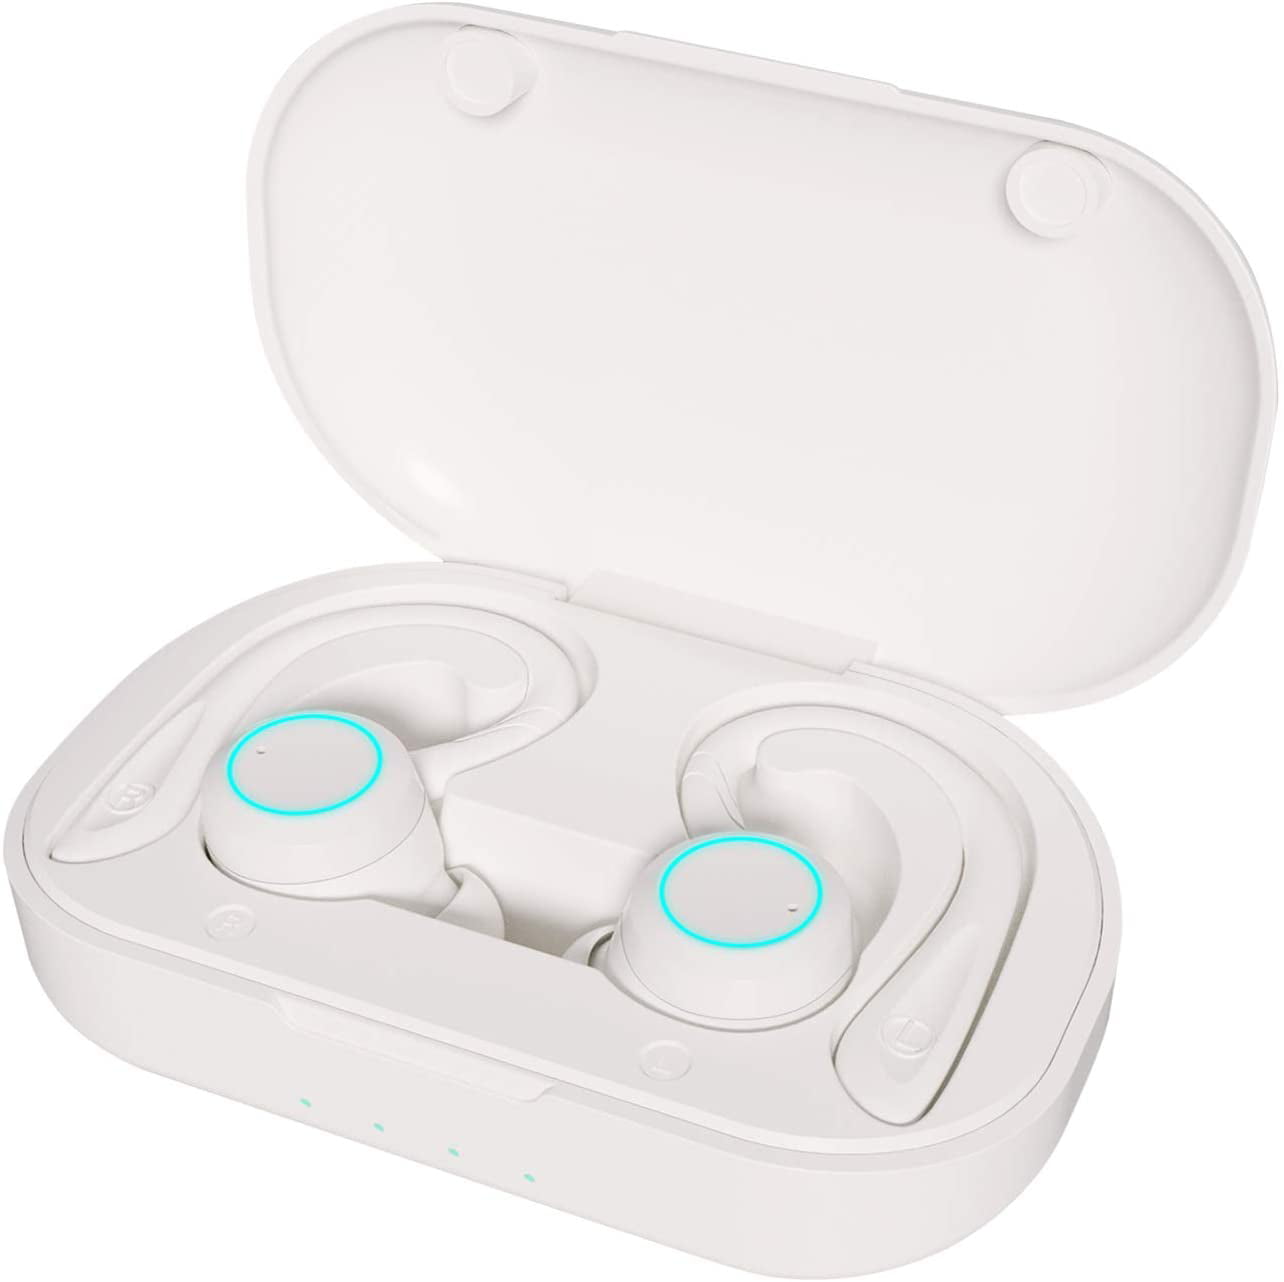 Wireless Earbuds Bluetooth，True Bluetooth 5.0 Headphones Built-in Mic with Portable Power Case IPX6 Waterproof for Sports Running 